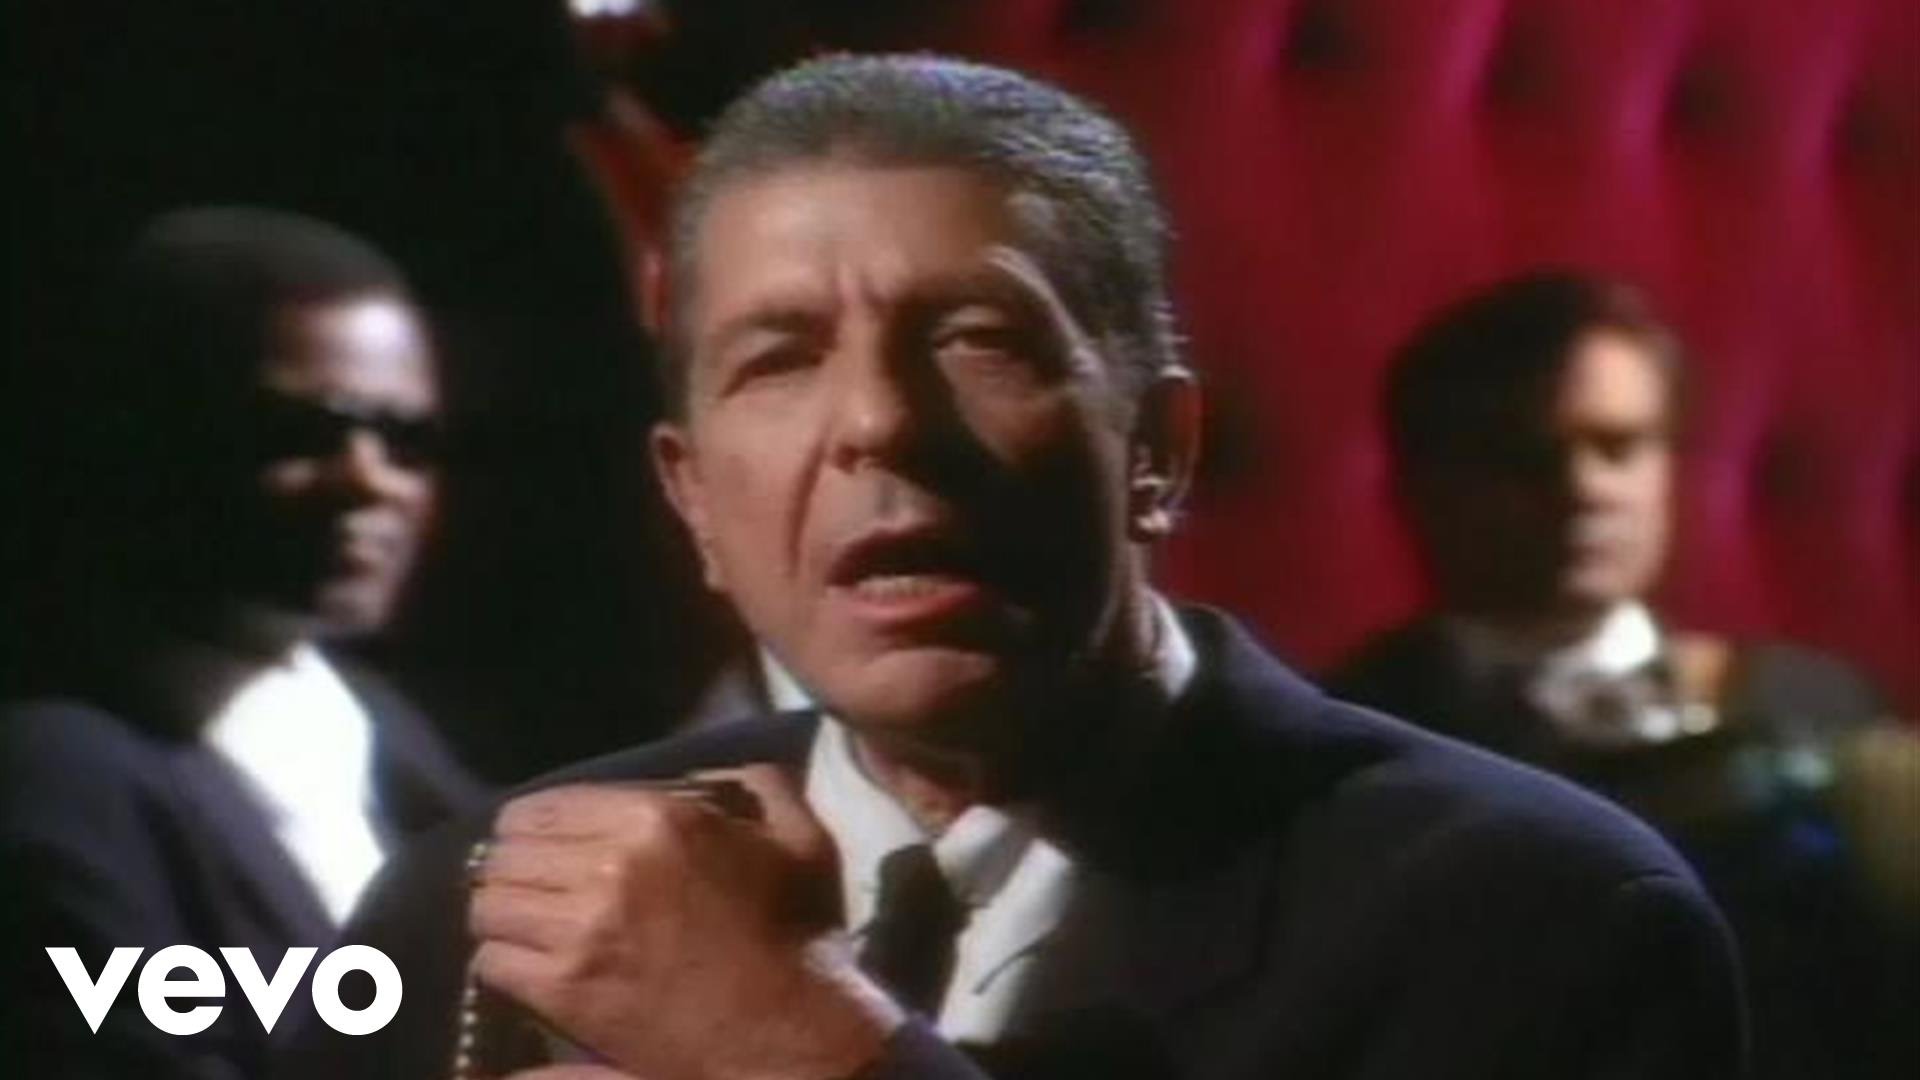 Leonard Cohen – Dance Me to the End of Love